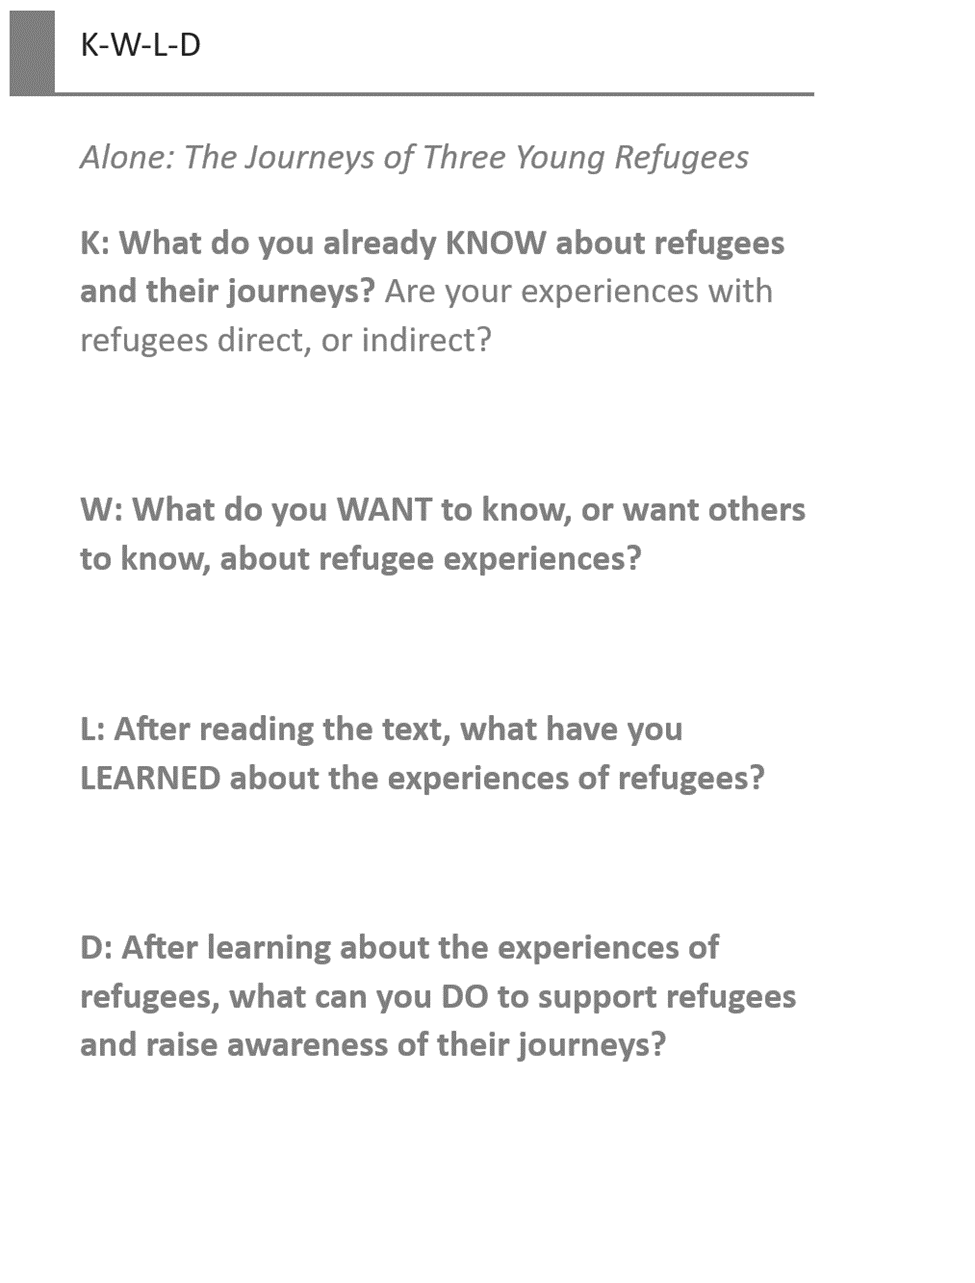 K-W-L-D: Alone: The Journeys of Three Young Refugees